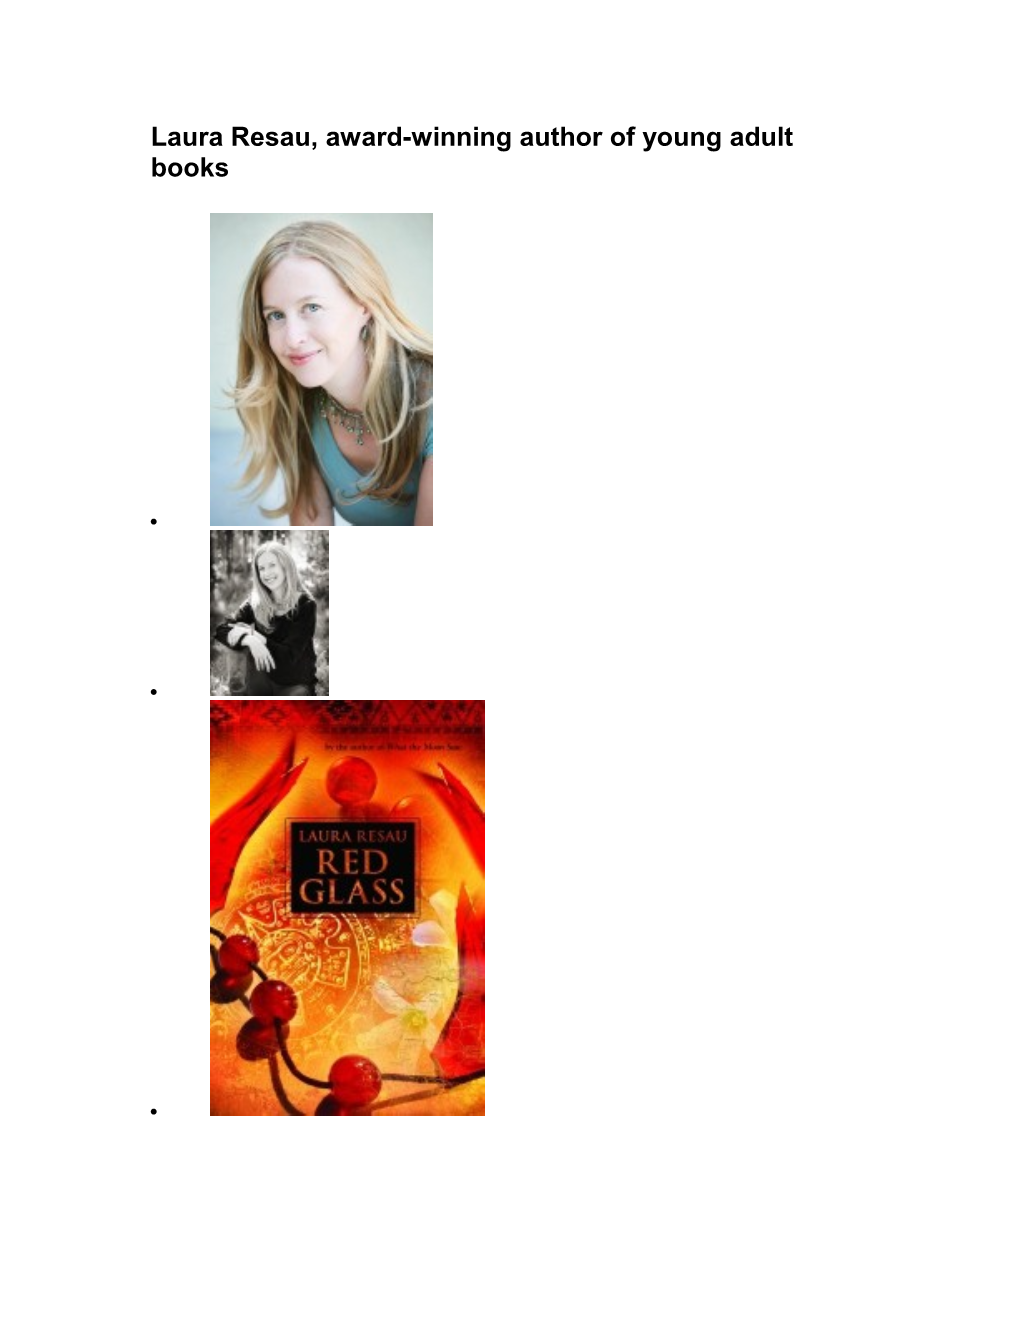 Laura Resau, Award-Winning Author of Young Adult Books